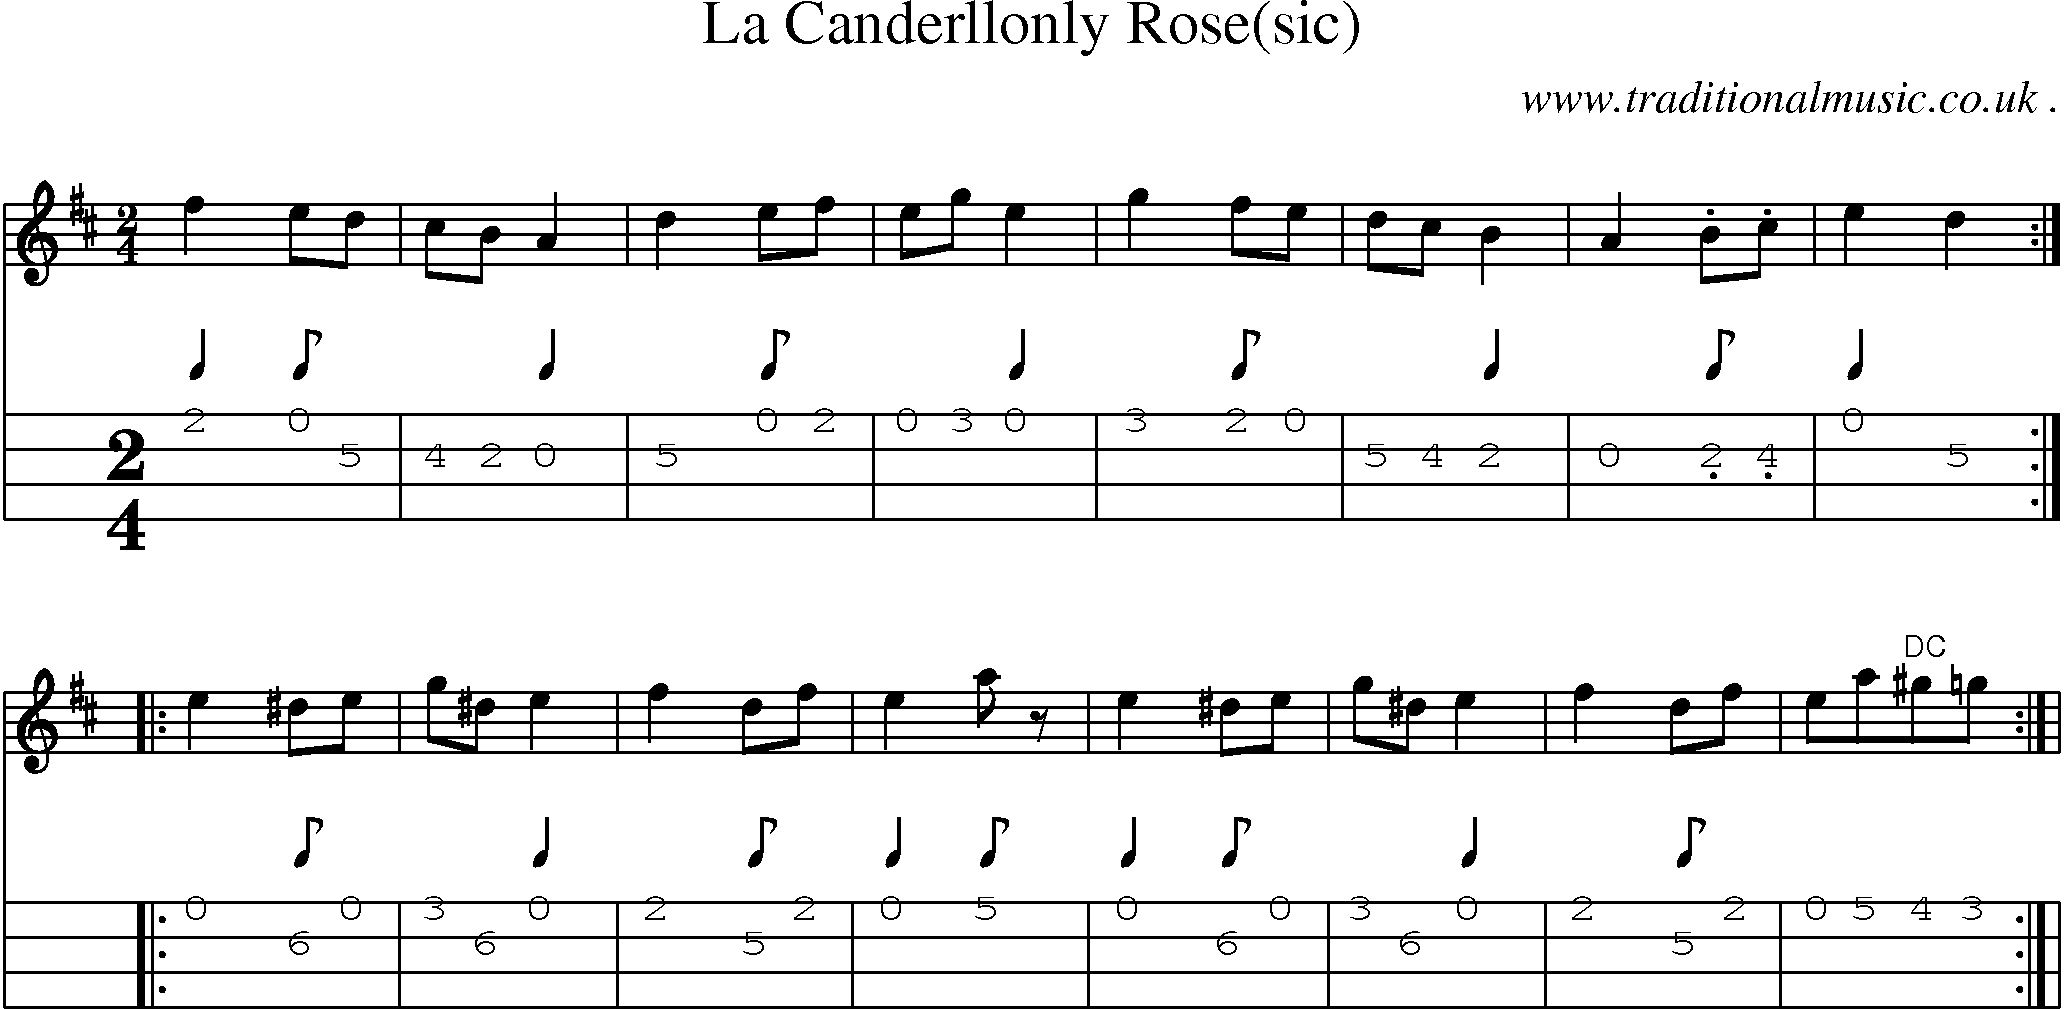 Sheet-Music and Mandolin Tabs for La Canderllonly Rose(sic)